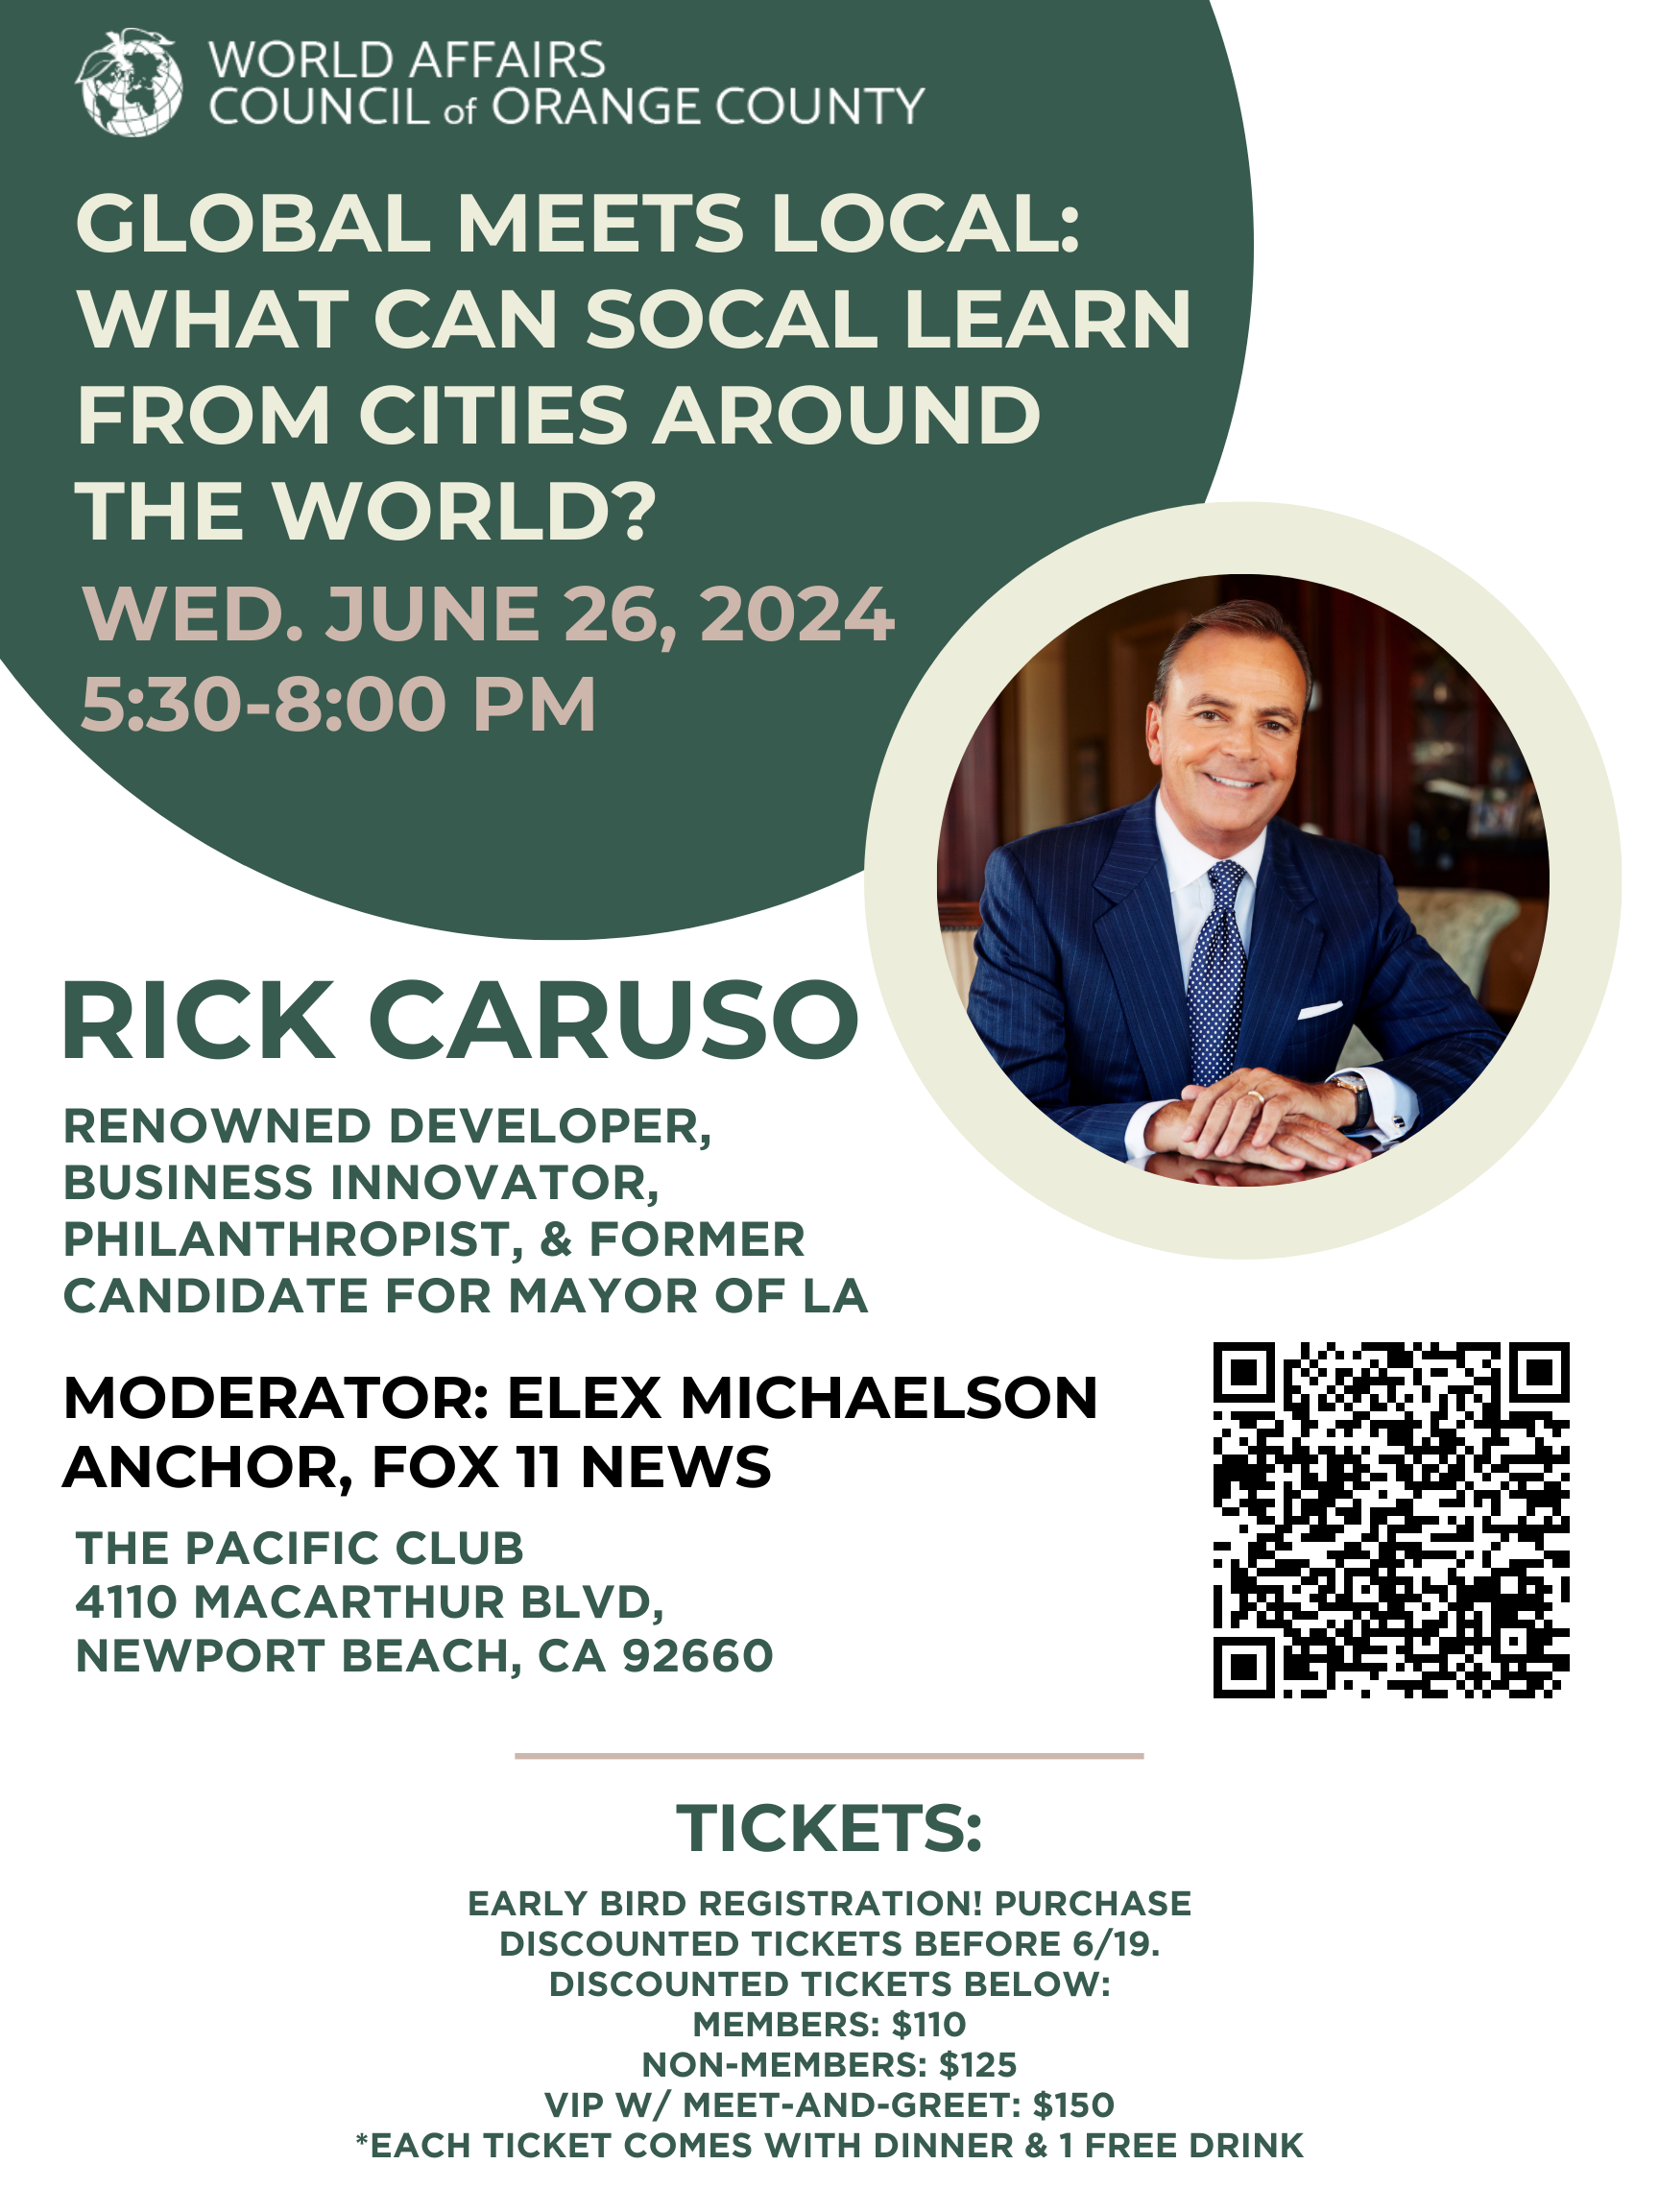 Rick Caruso "What Can SoCal Learn From Cities Around the World?